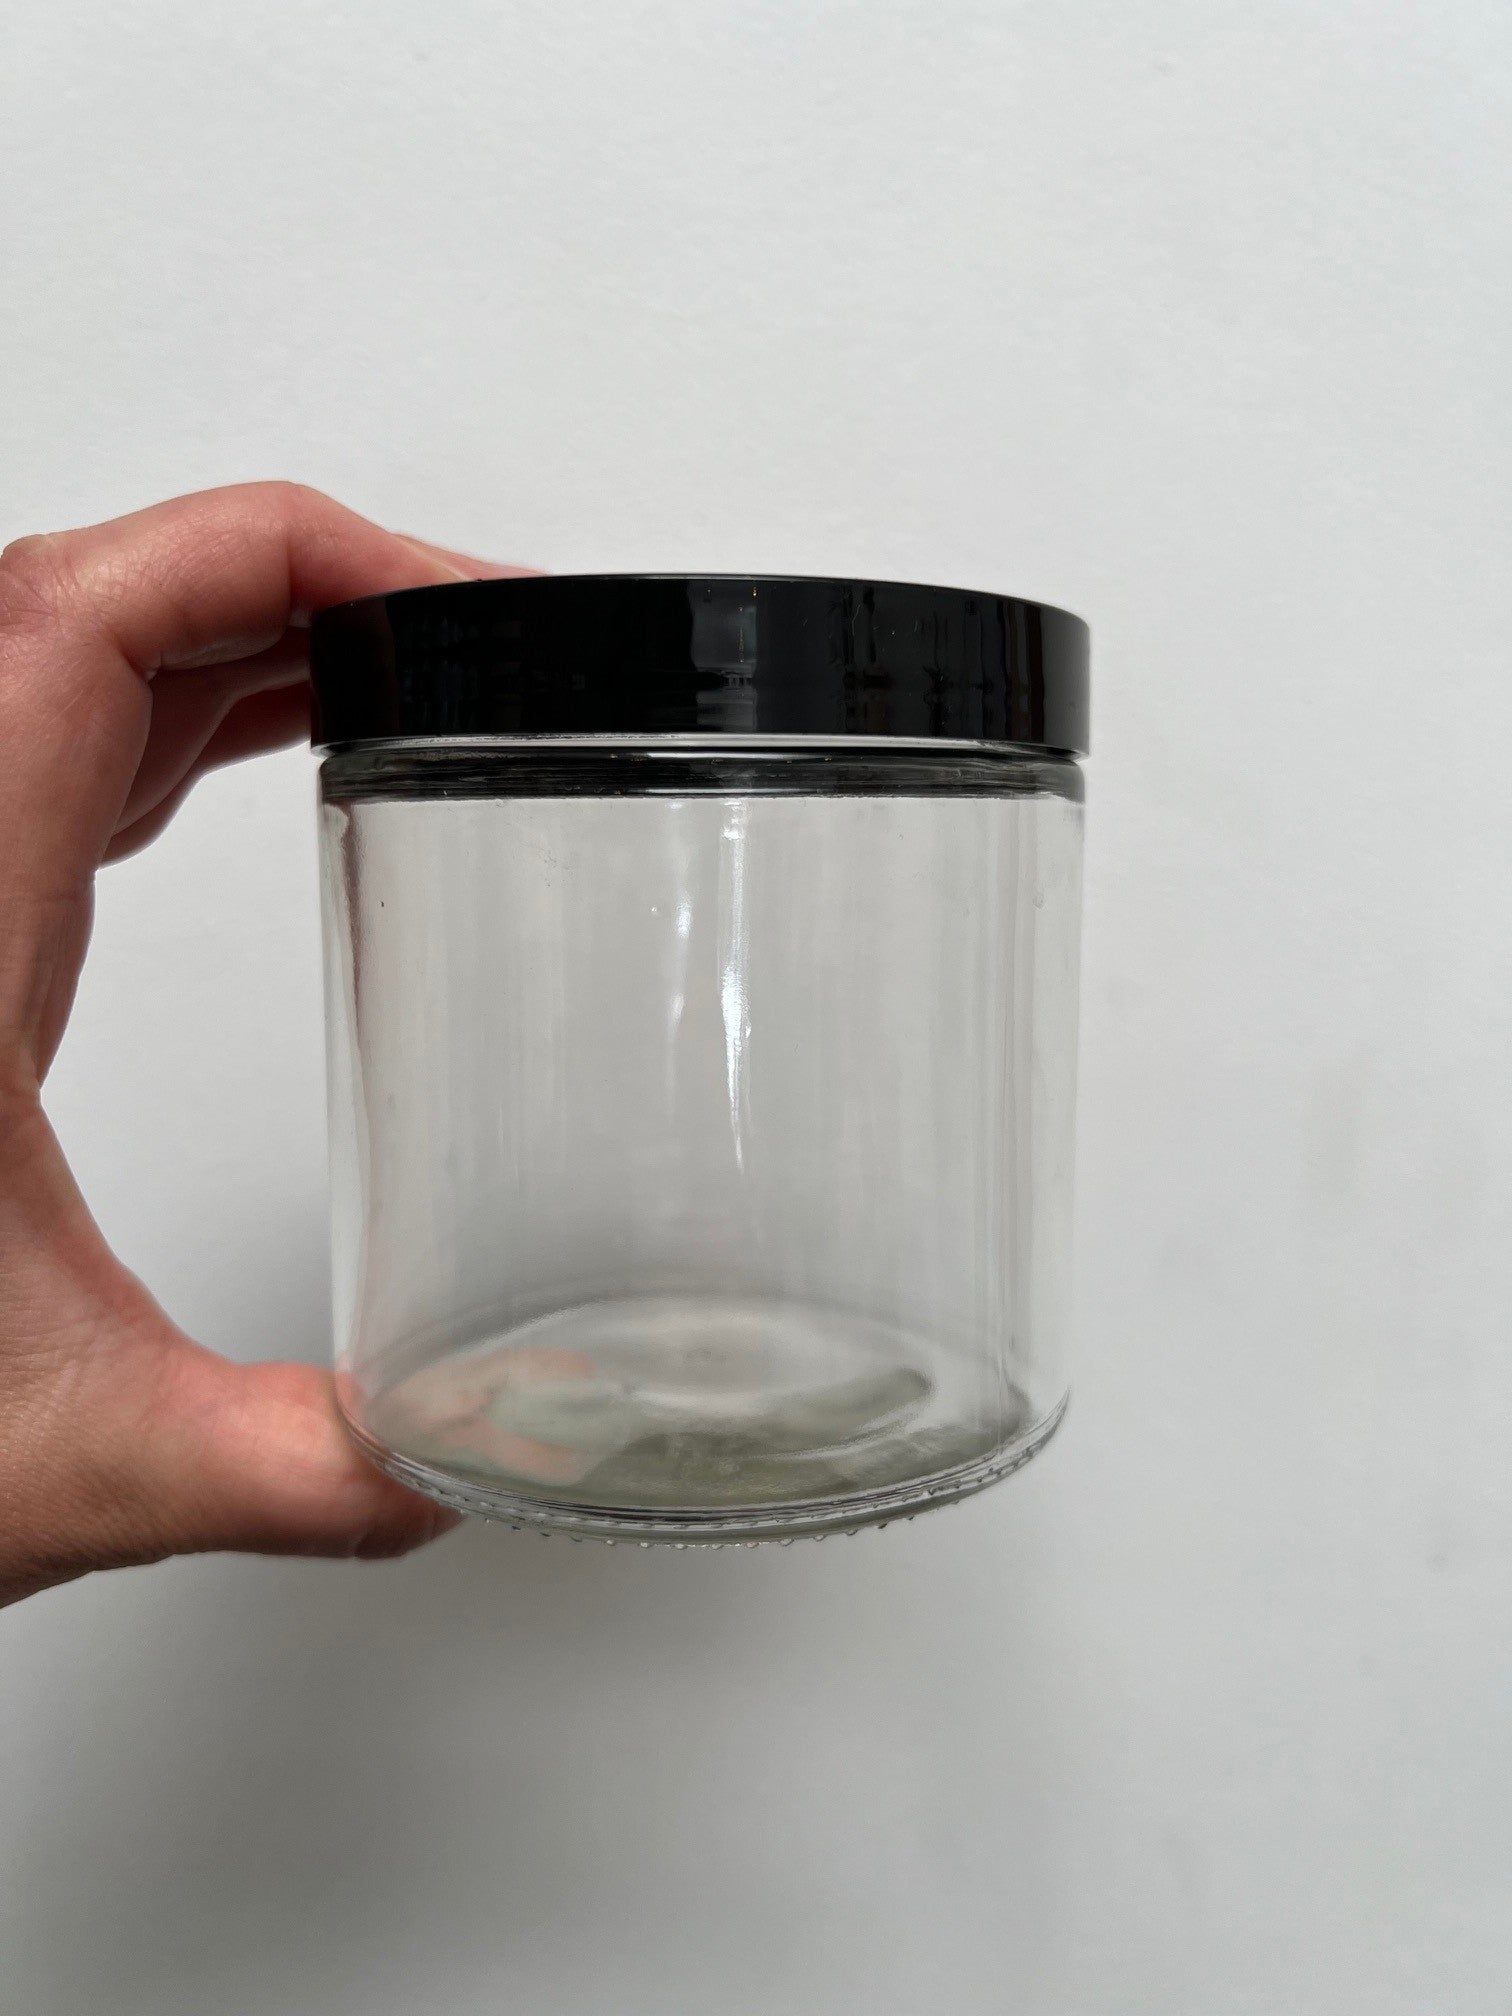 16 ounce clear glass jar with black plastic lid, shown as a container option